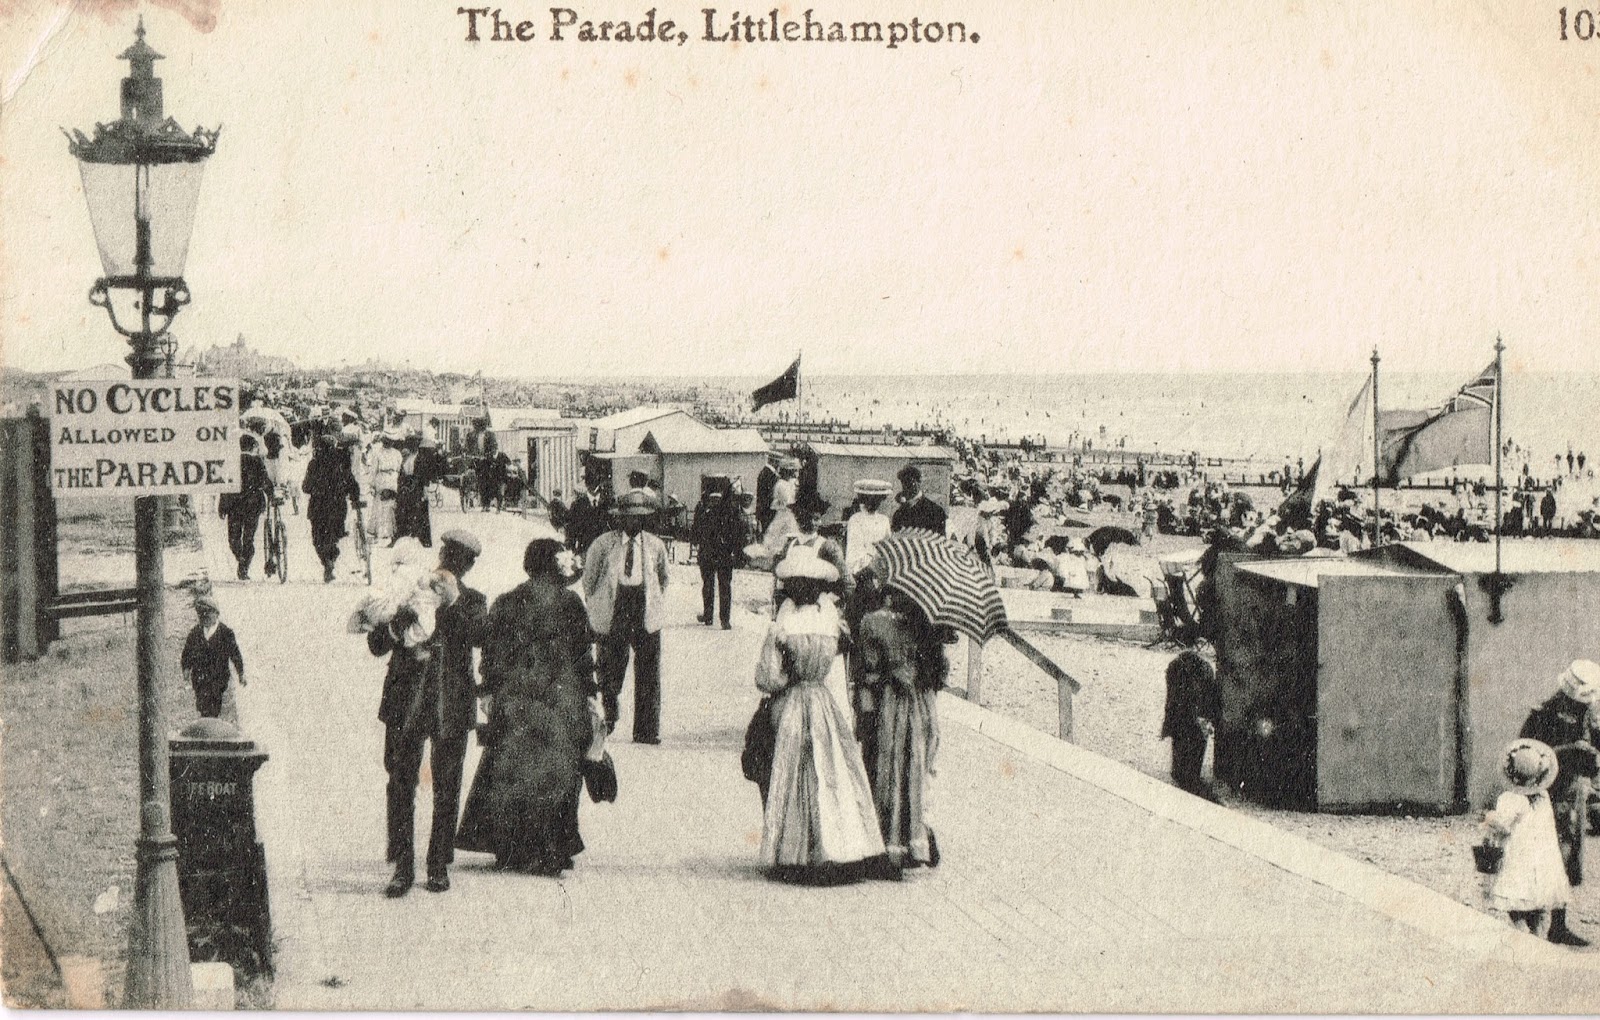 Lost in the past: The #Edwardian Seaside #postcards